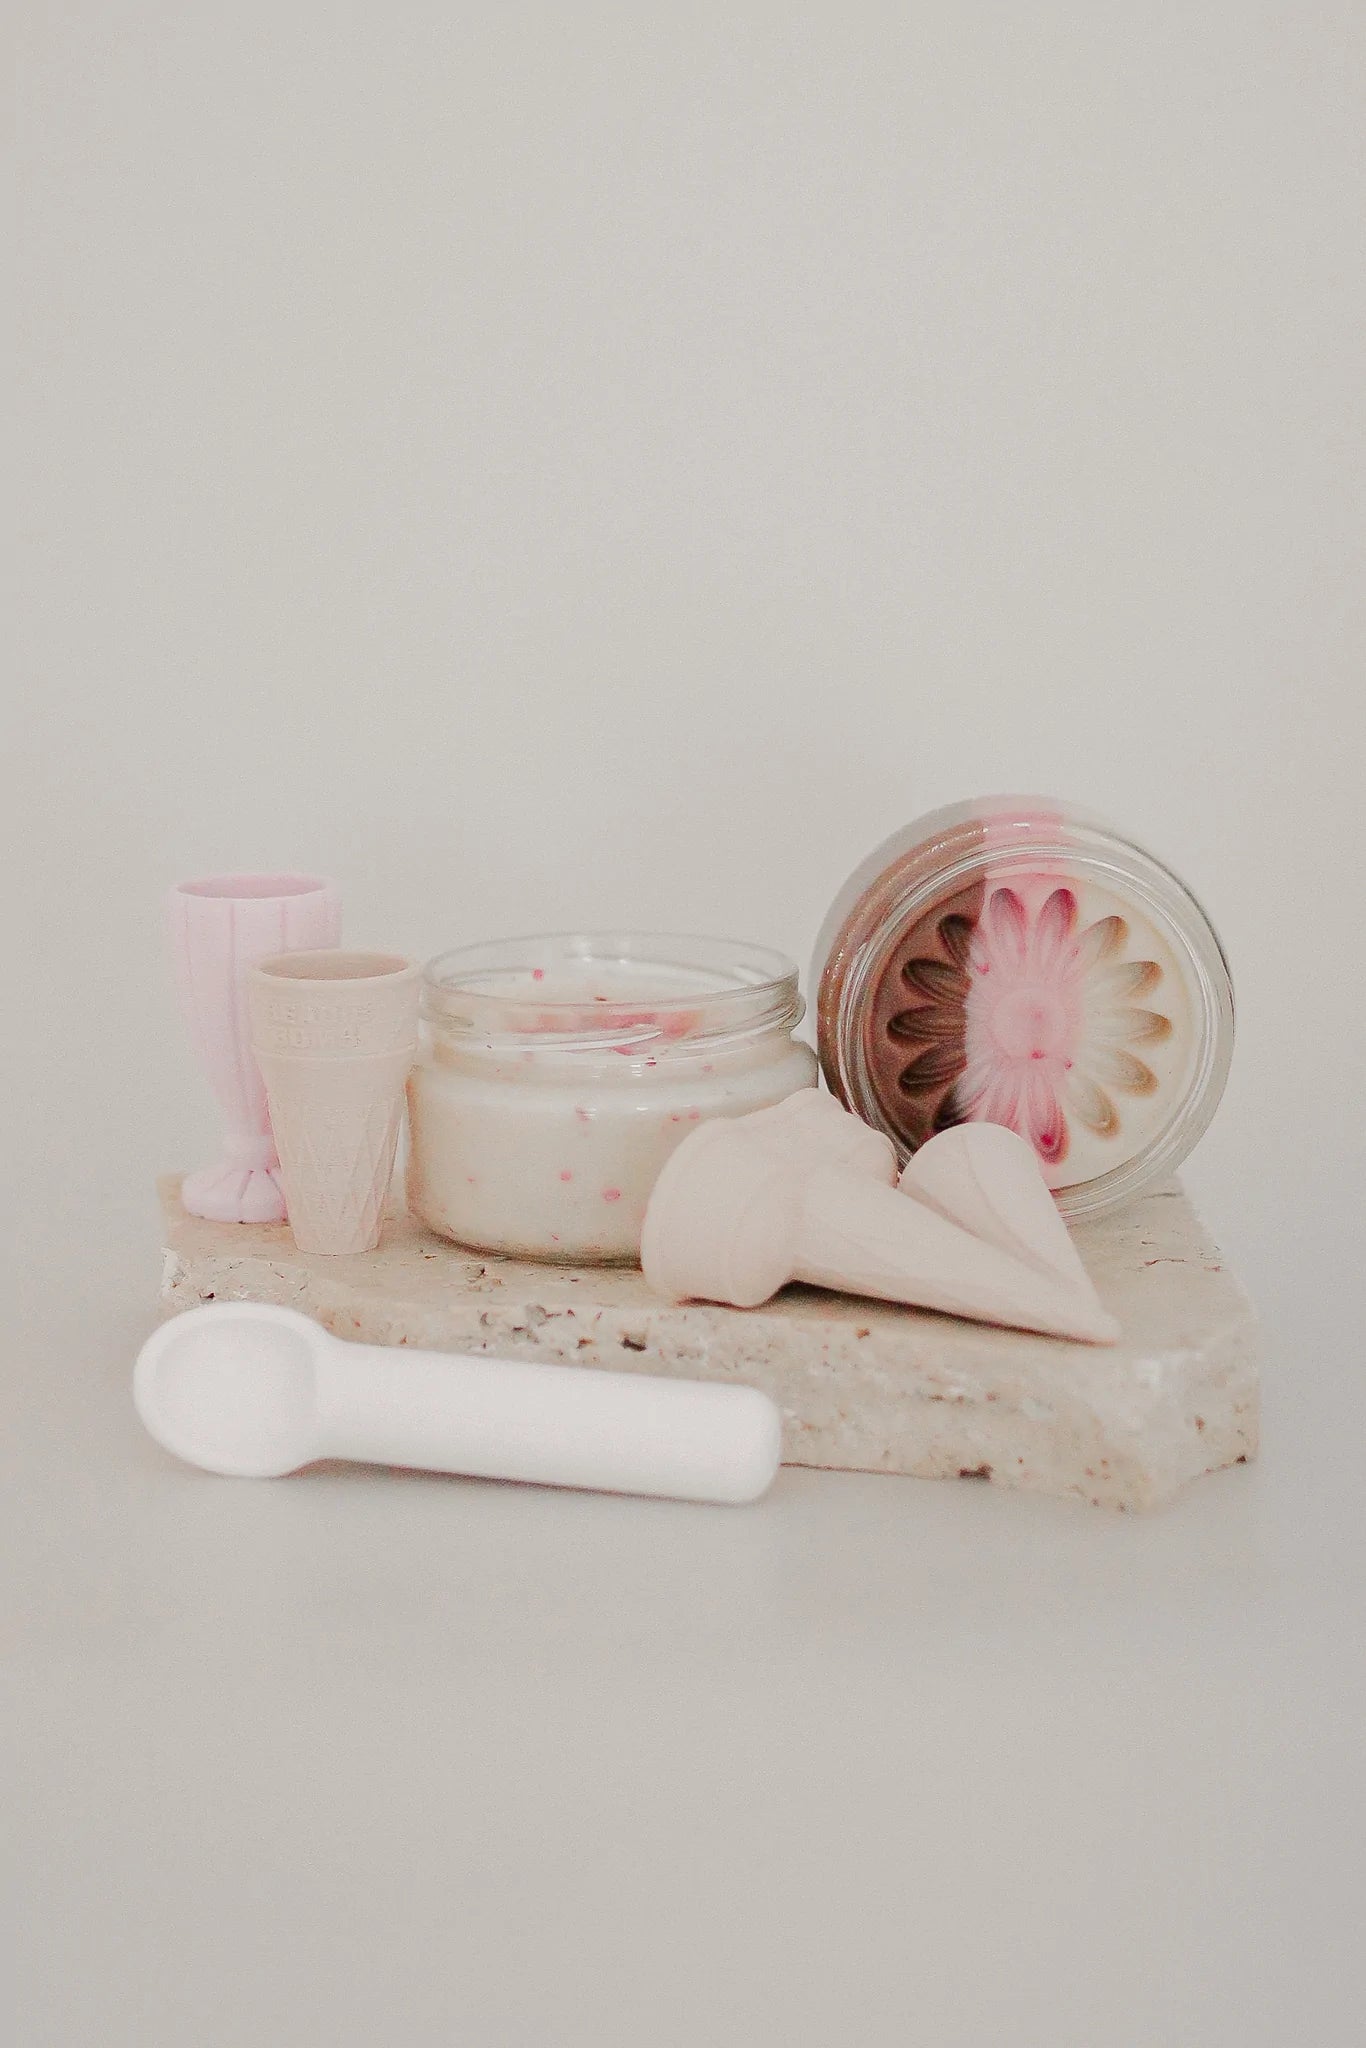 ICE-CREAM SHOP - SINGLE SCOOP KIT by BEADIE BUG PLAY - The Playful Collective